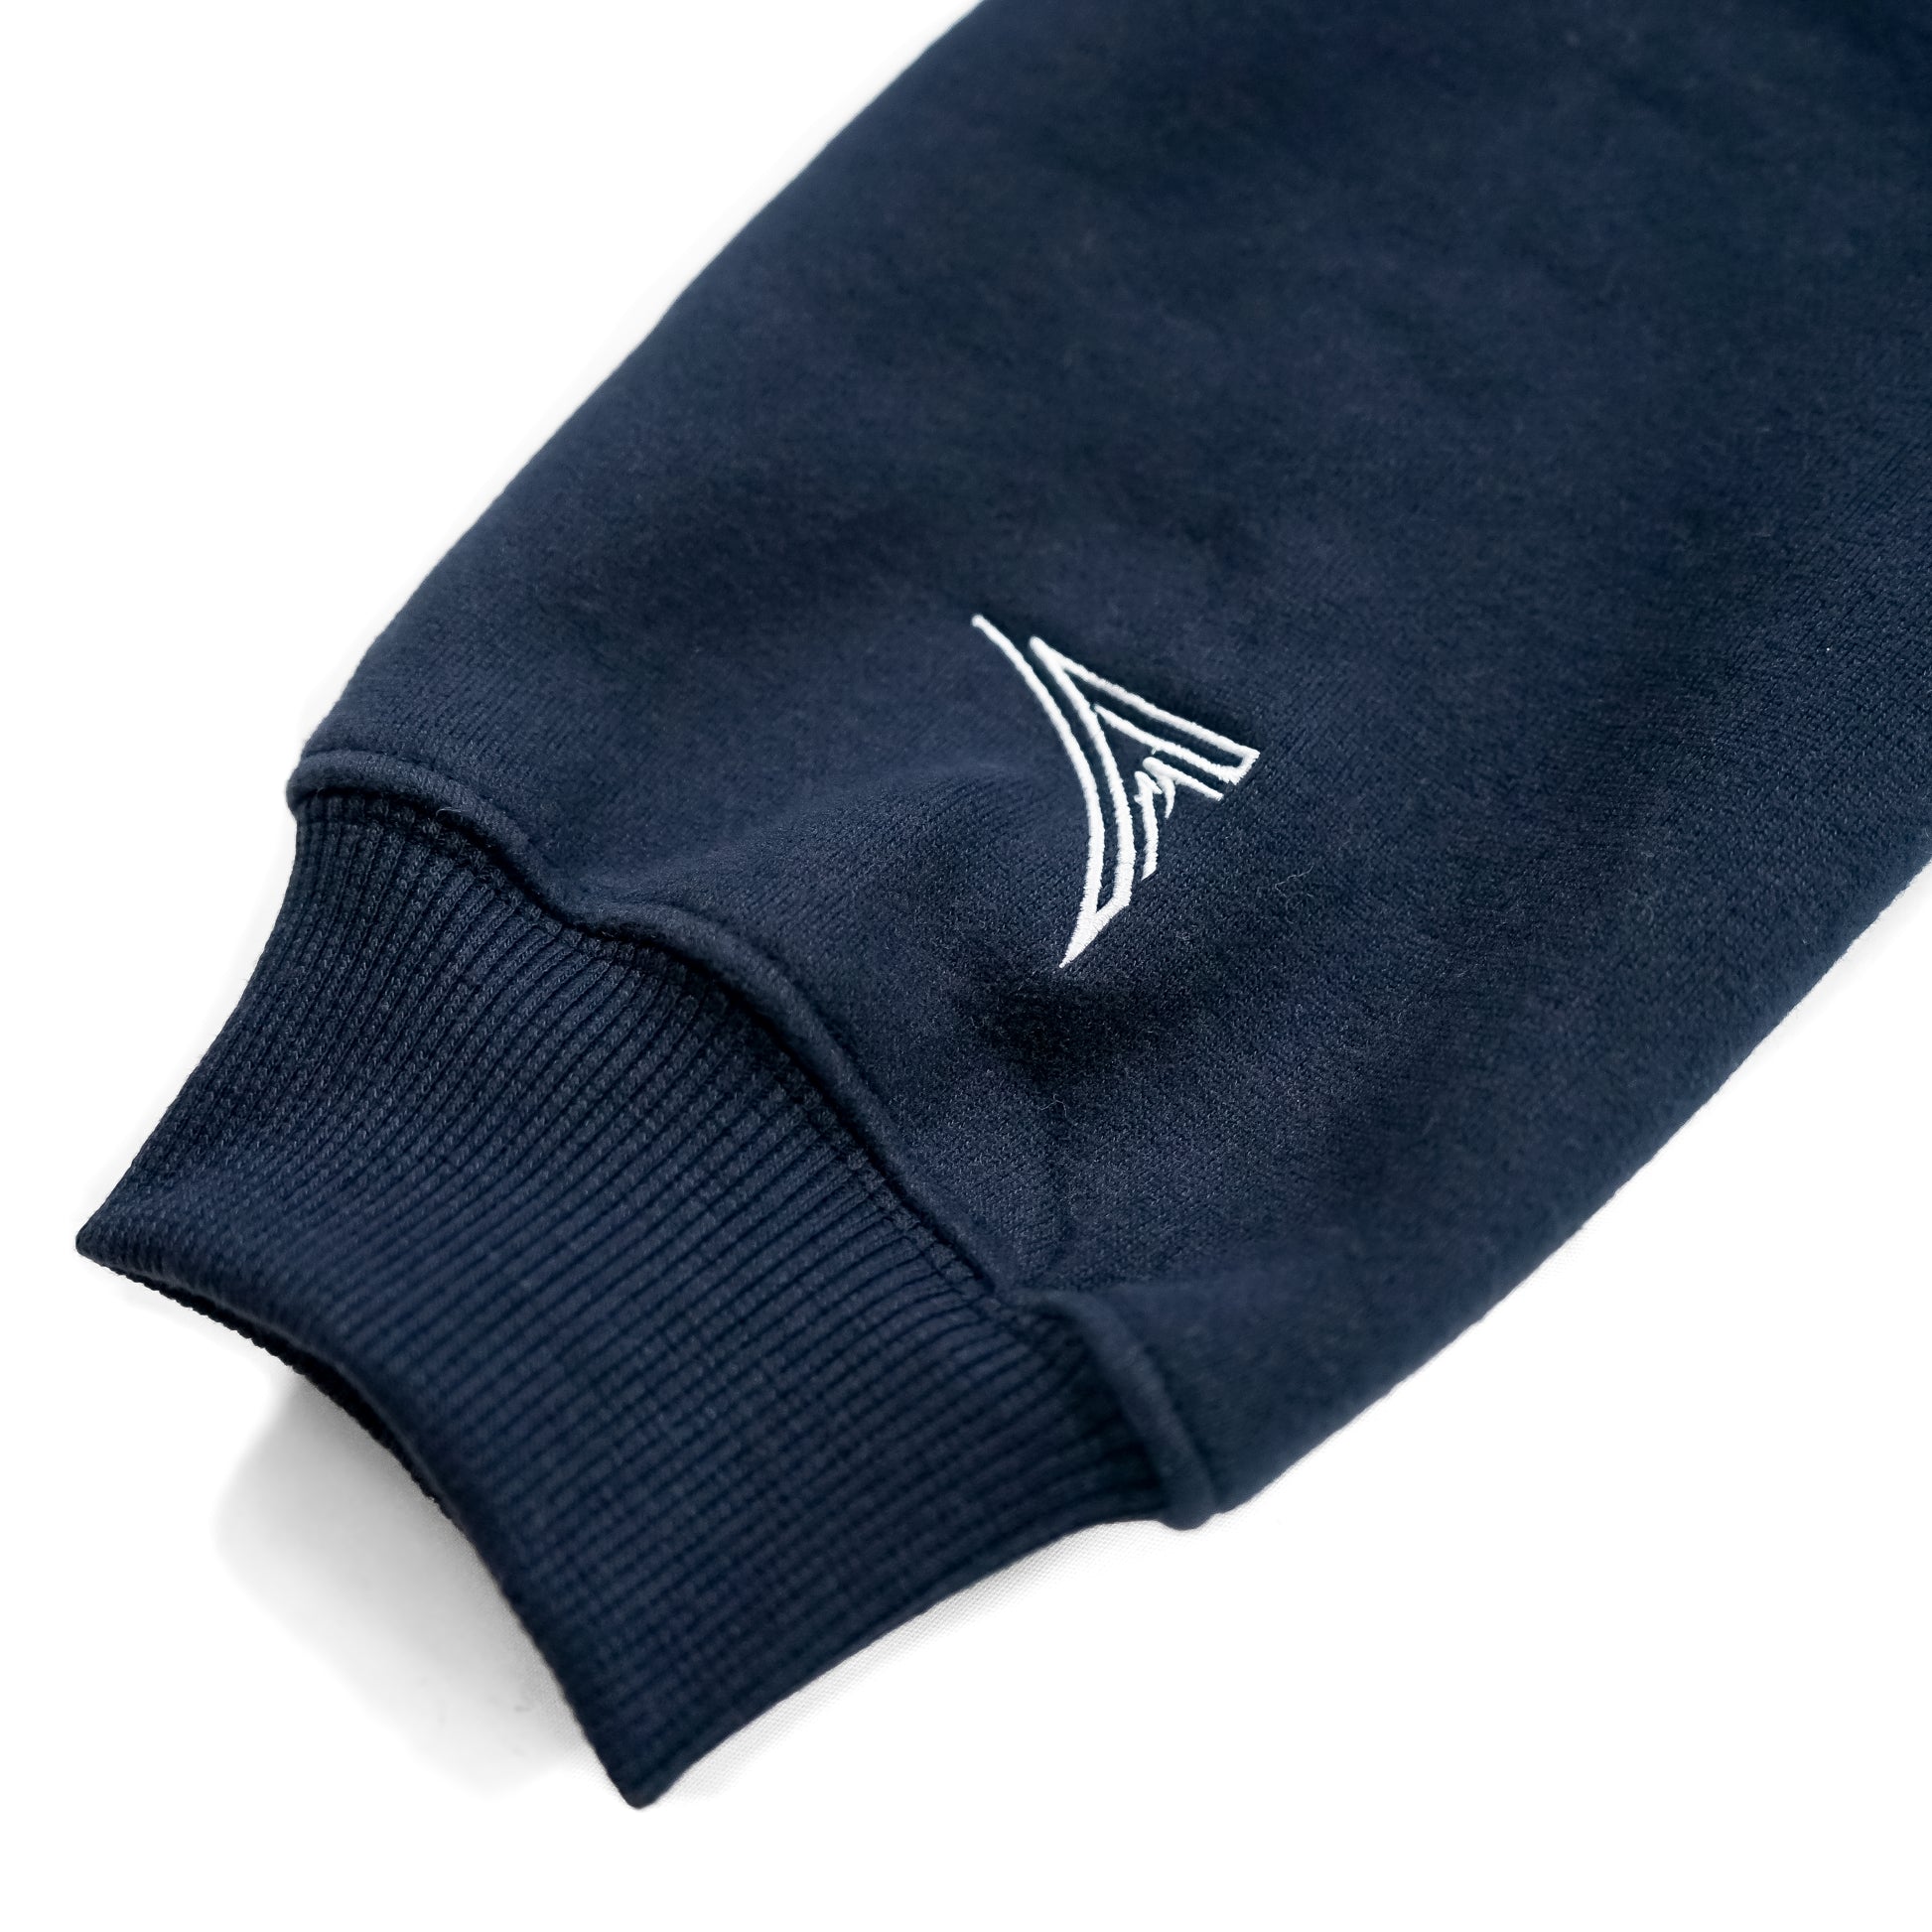 navy blue sleeve with a AmSTRONG embroidered logo